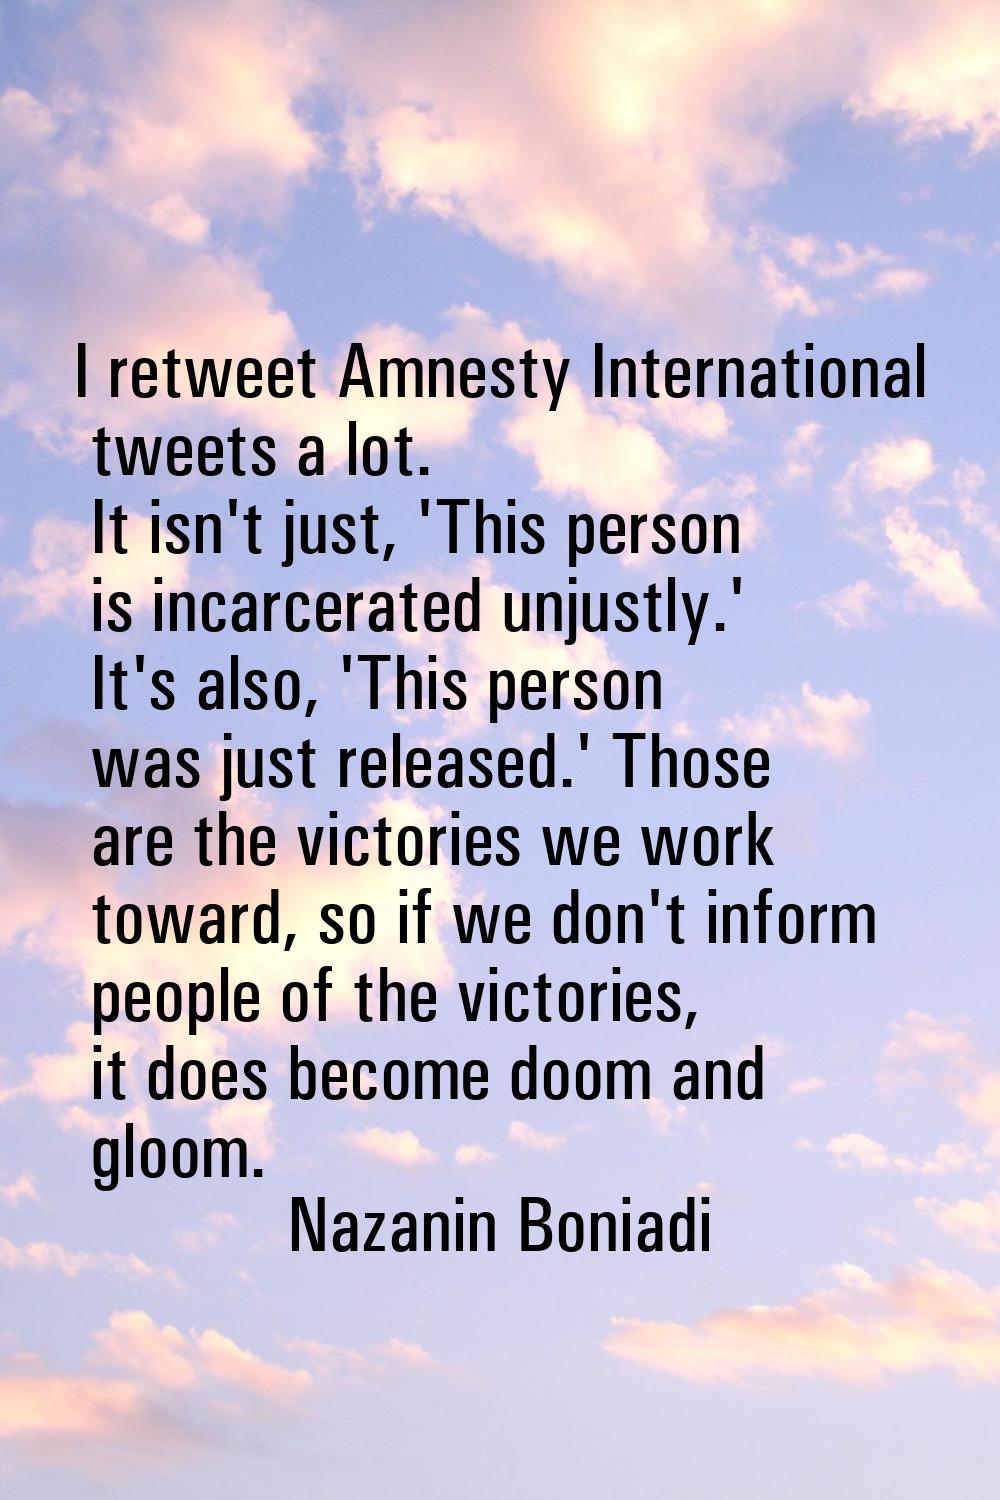 I retweet Amnesty International tweets a lot. It isn't just, 'This person is incarcerated unjustly.